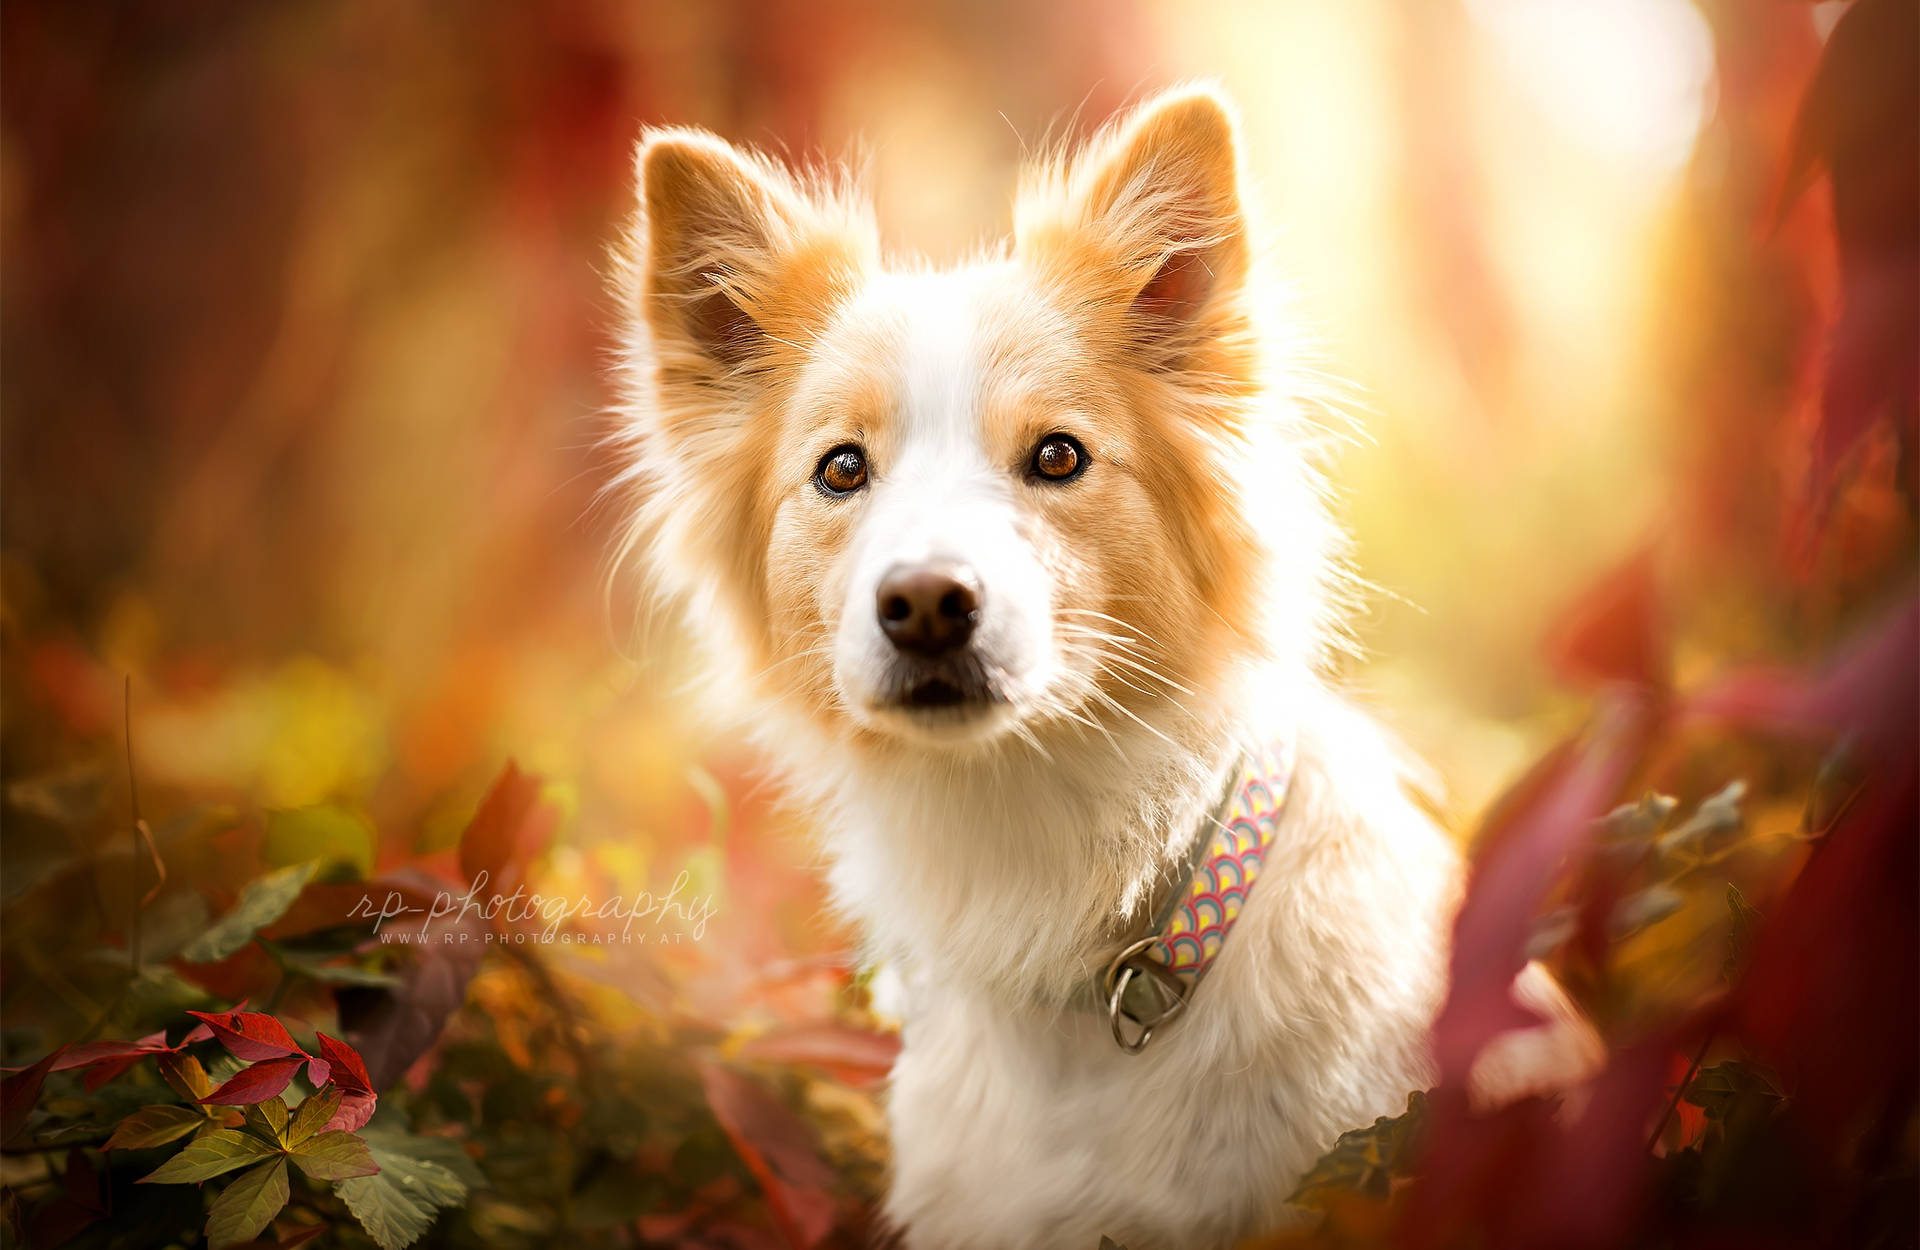 Cute Dog Sitting On Leaves Background